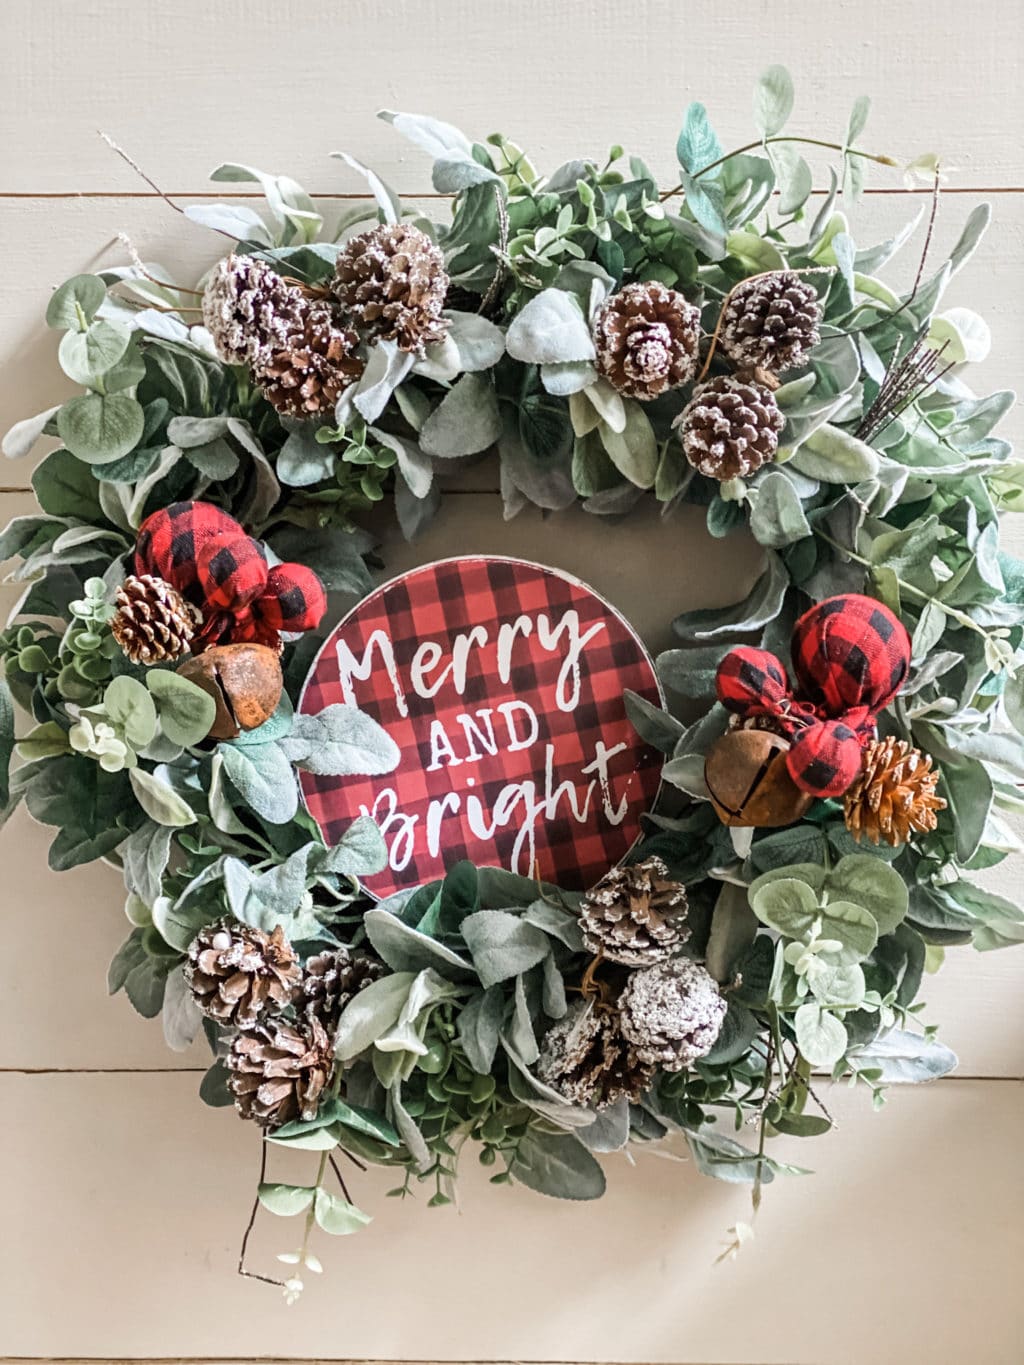 Free printable- perfect for a holiday wreath sign!